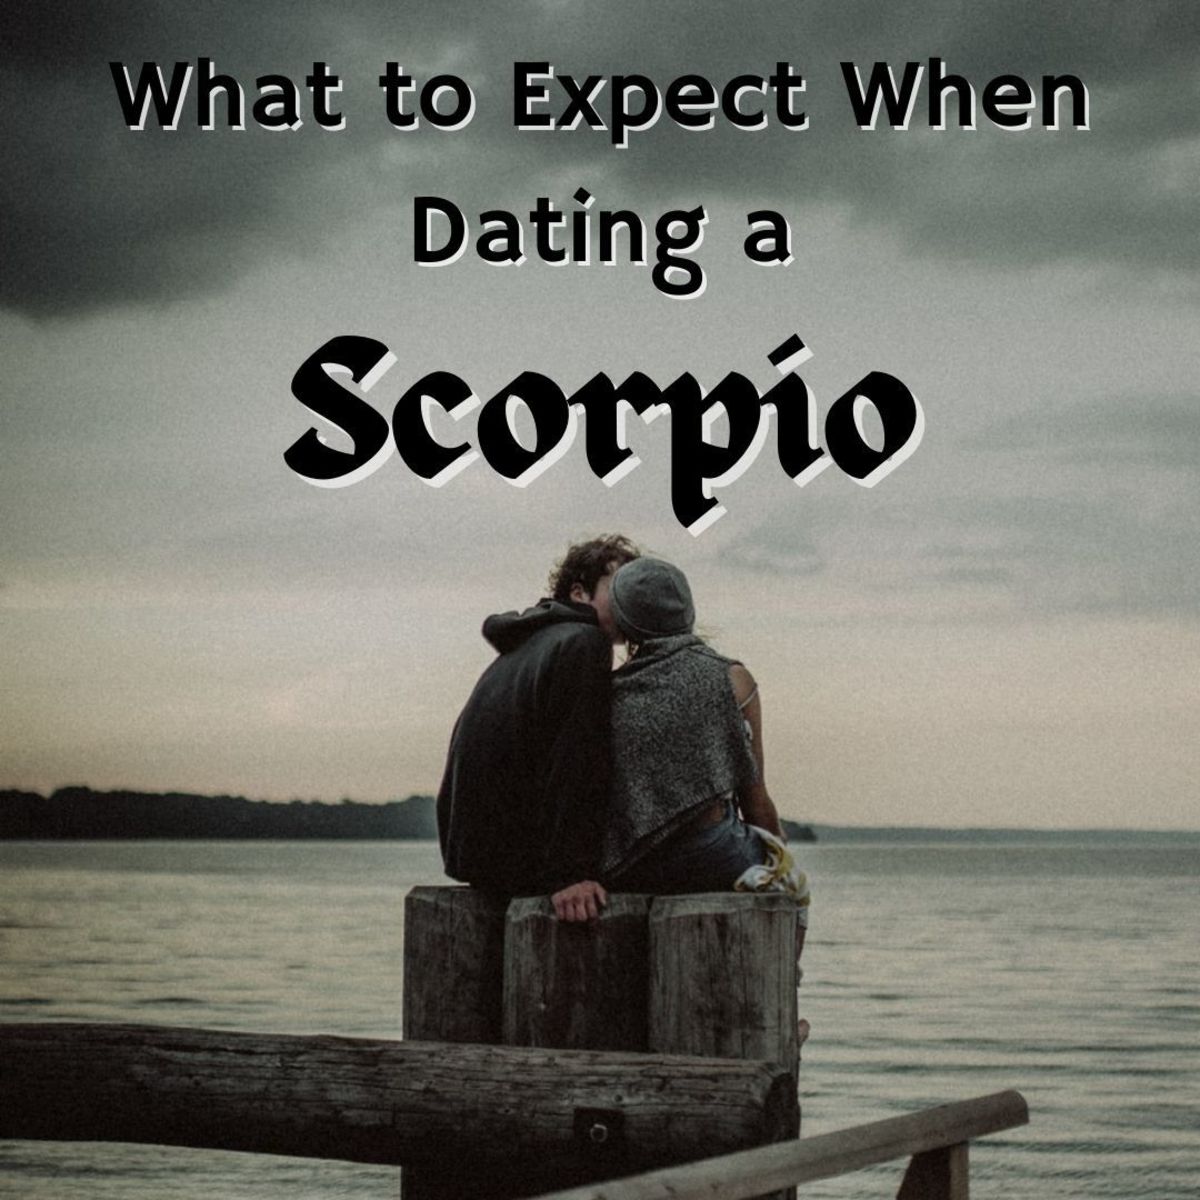 dating-a-scorpio-what-to-expect